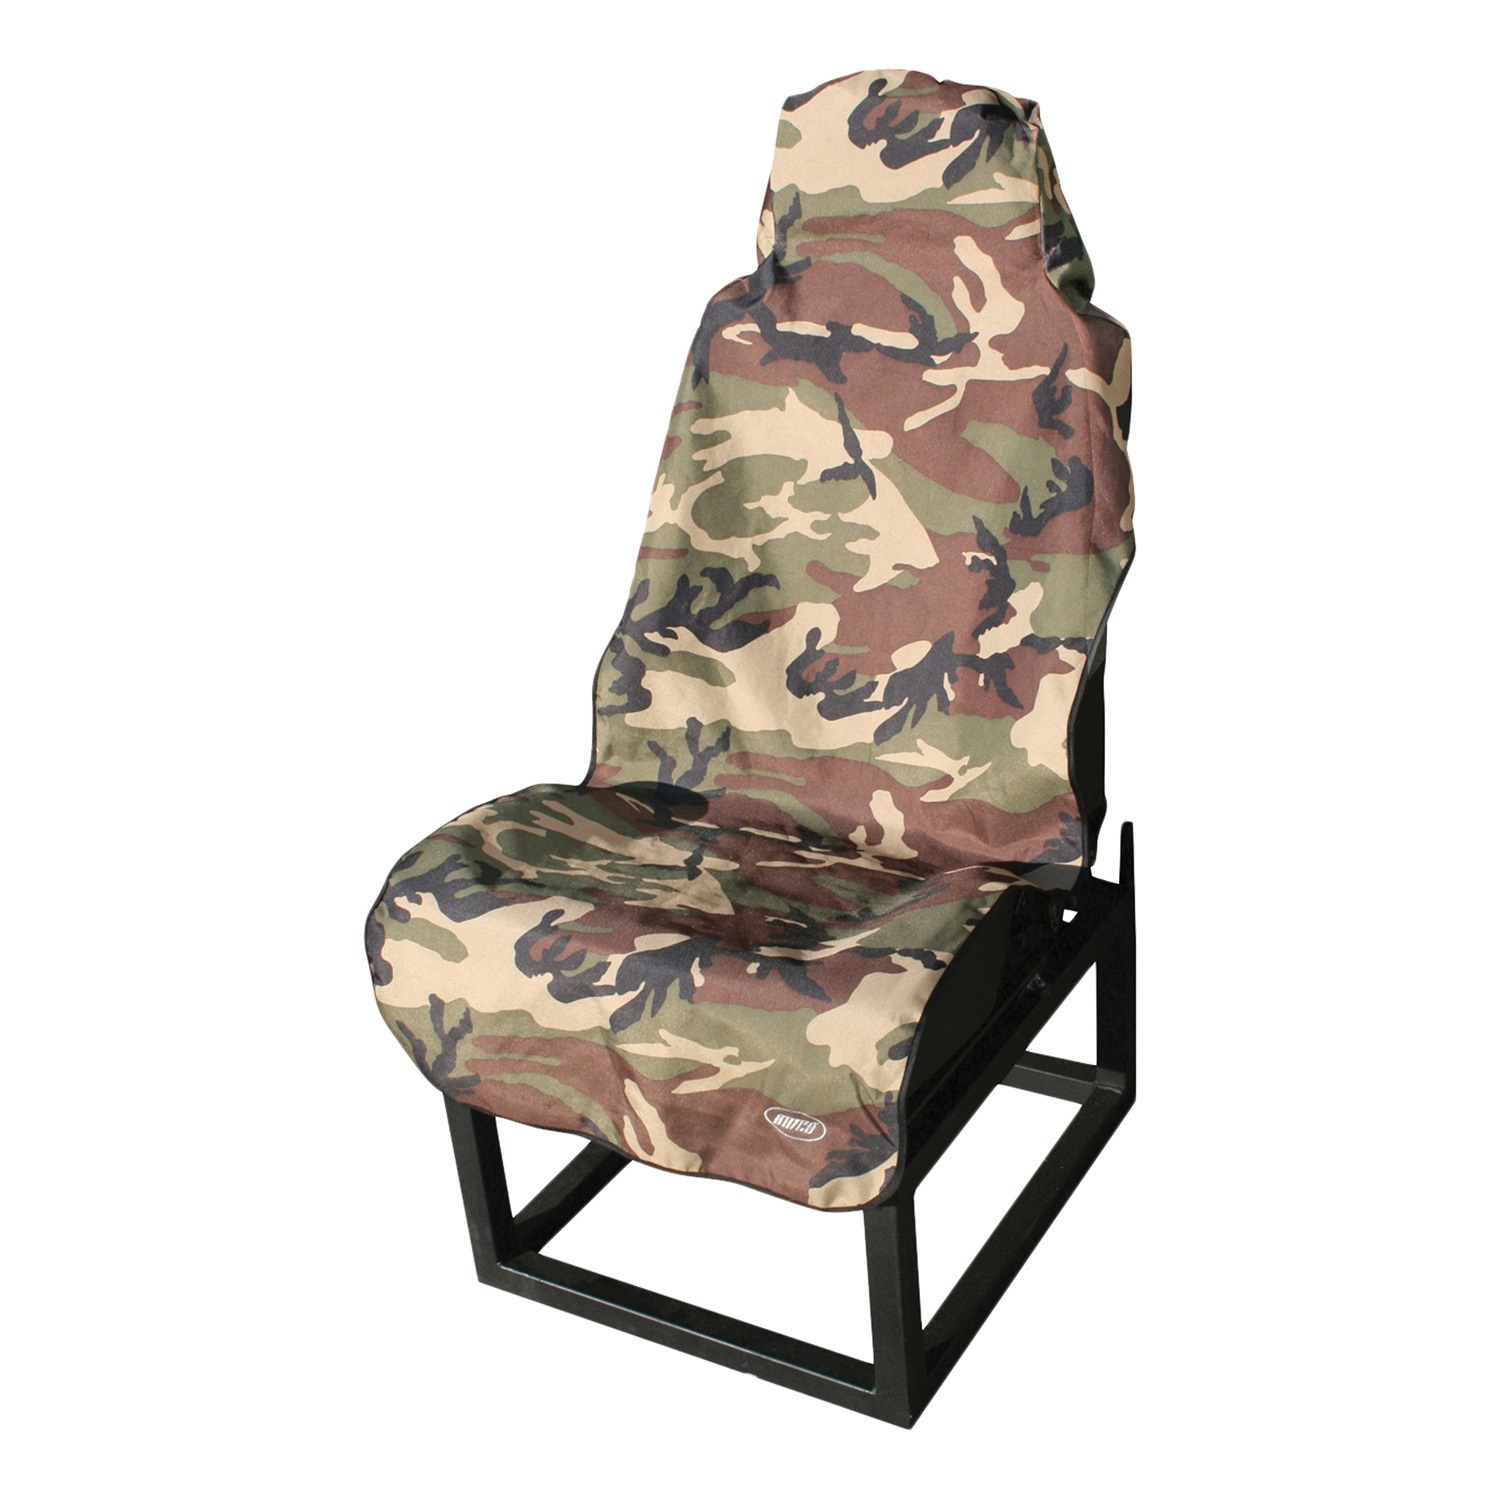 ARIES 3142-20 CAMOUFLAGE FRONT SEAT DEFENDER CAMO - image 2 of 3